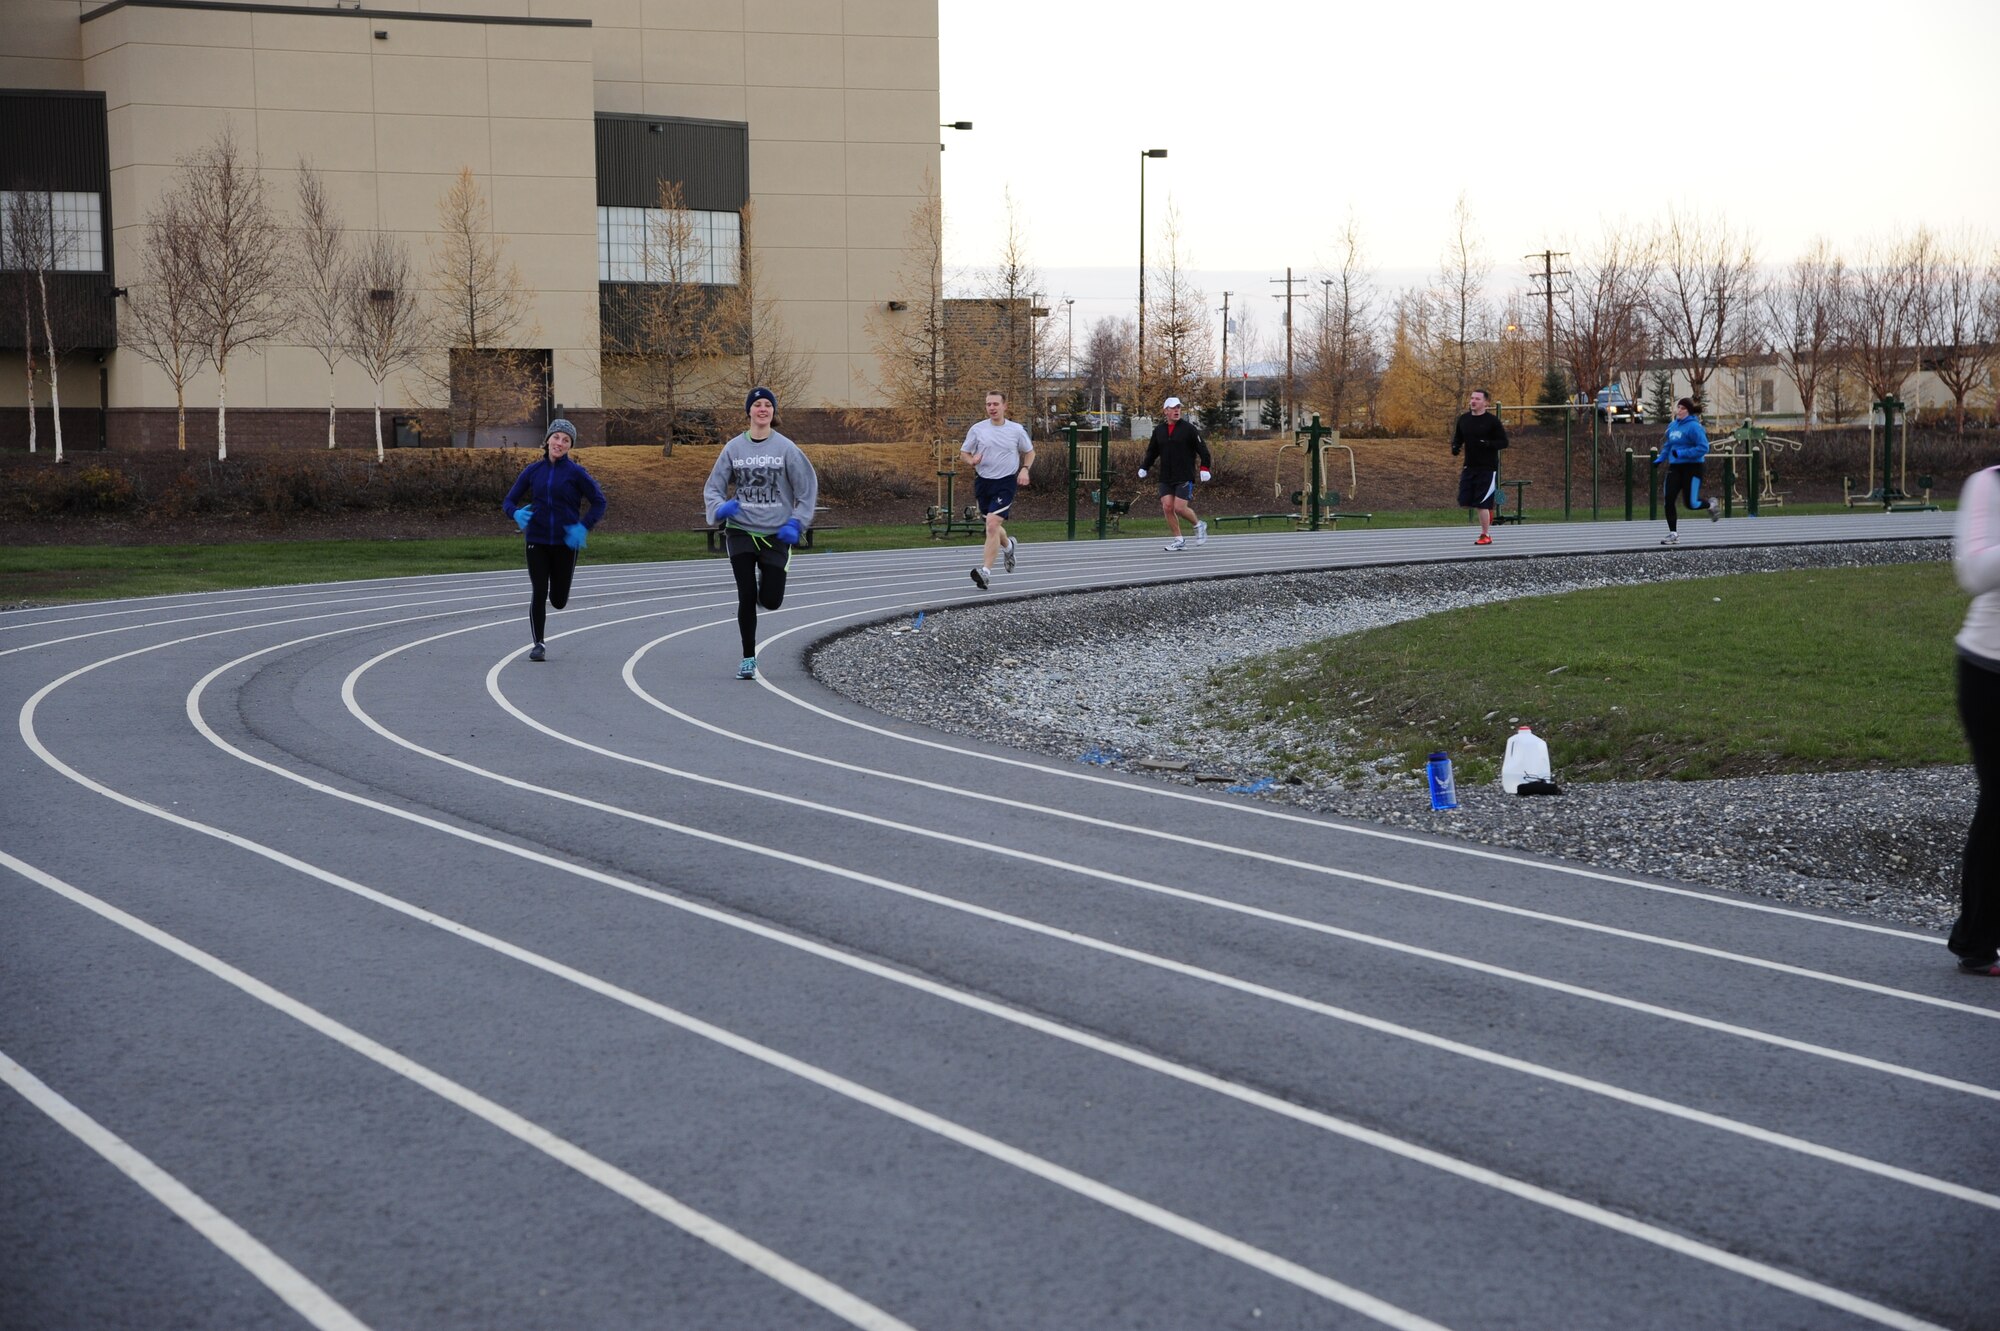 Participants in a running group make their way around the outdoor track during a workout Oct. 25, 2013, Eielson Air Force Base, Alaska. The running group is open to anyone and typically meets at noon on Fridays. For additional information on running or other fitness activities, visit the fitness center or call the Health and Wellness Center at 377-9355. (U.S. Air Force photo by Senior Airman Zachary Perras)